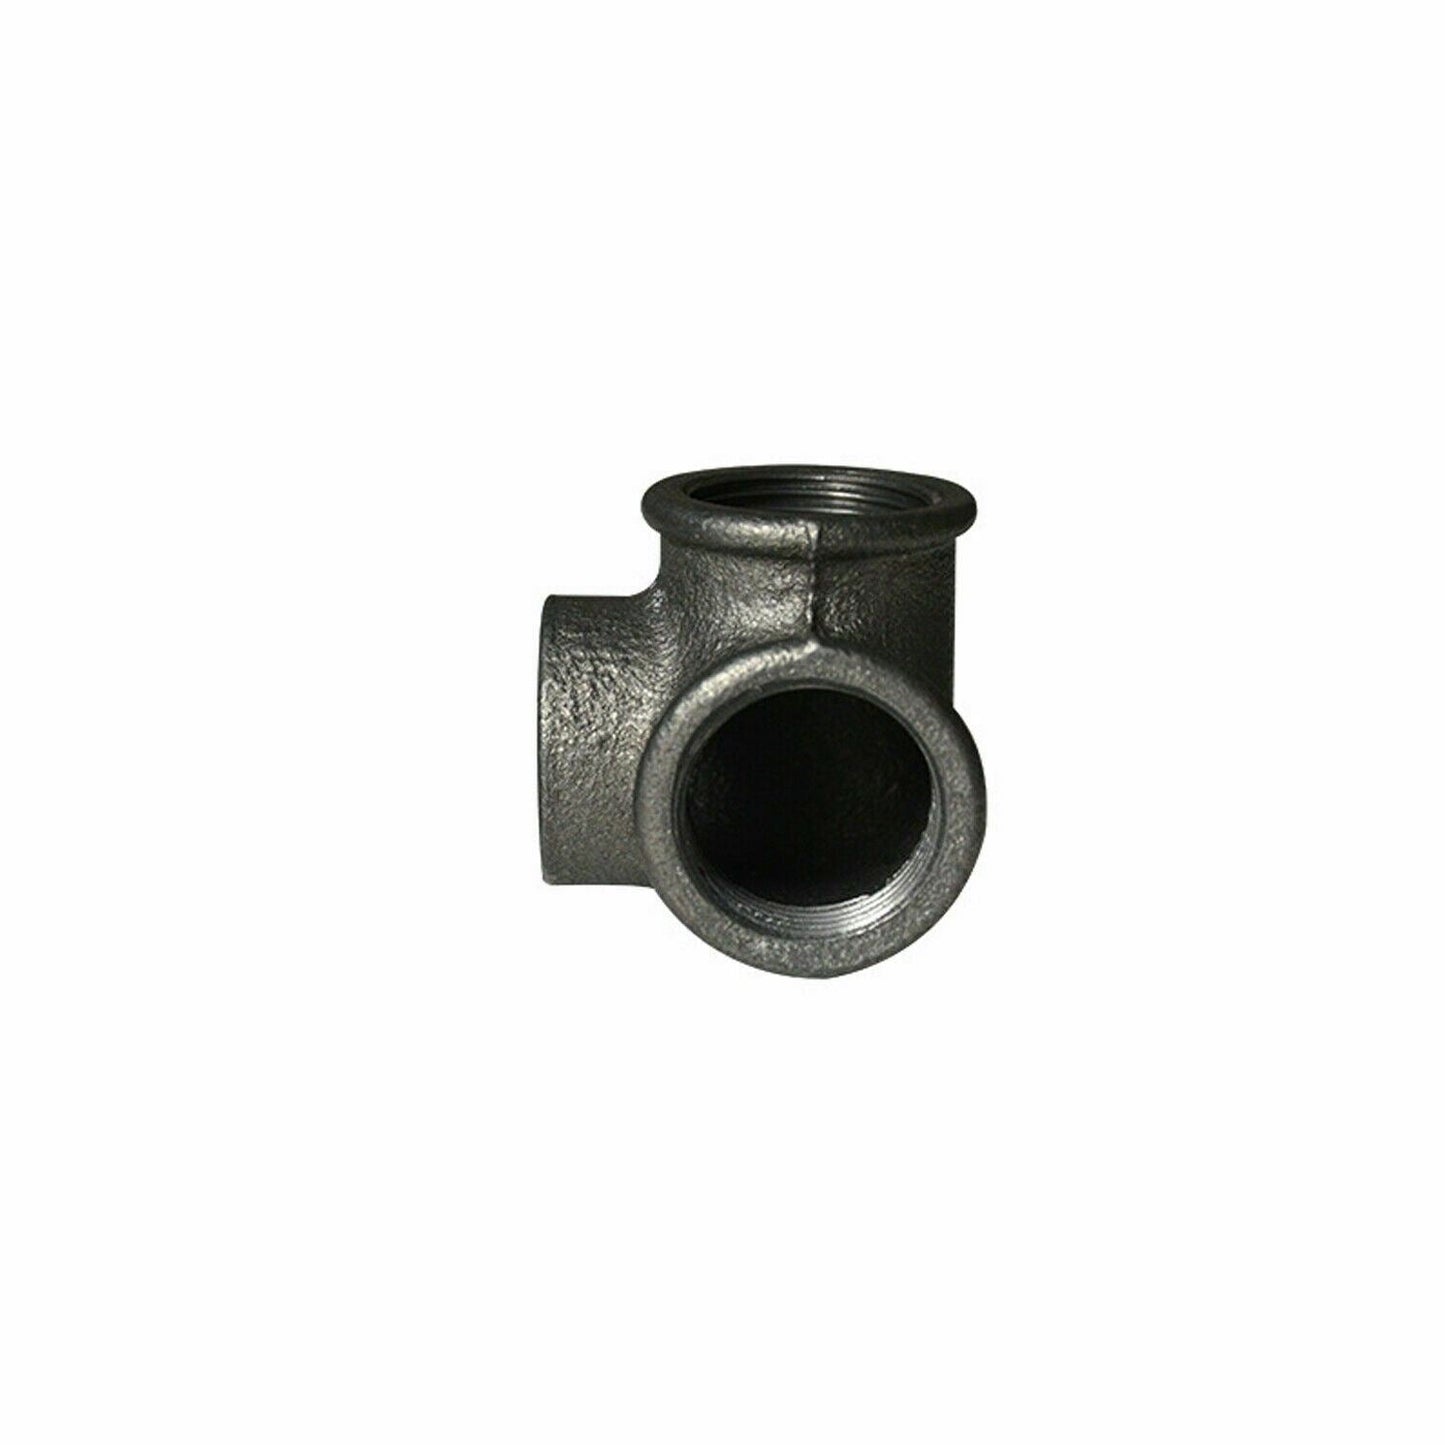 BLACK MALLEABLE IRON PIPE FITTING BSP 3/4" - JOINT CONNECTORS